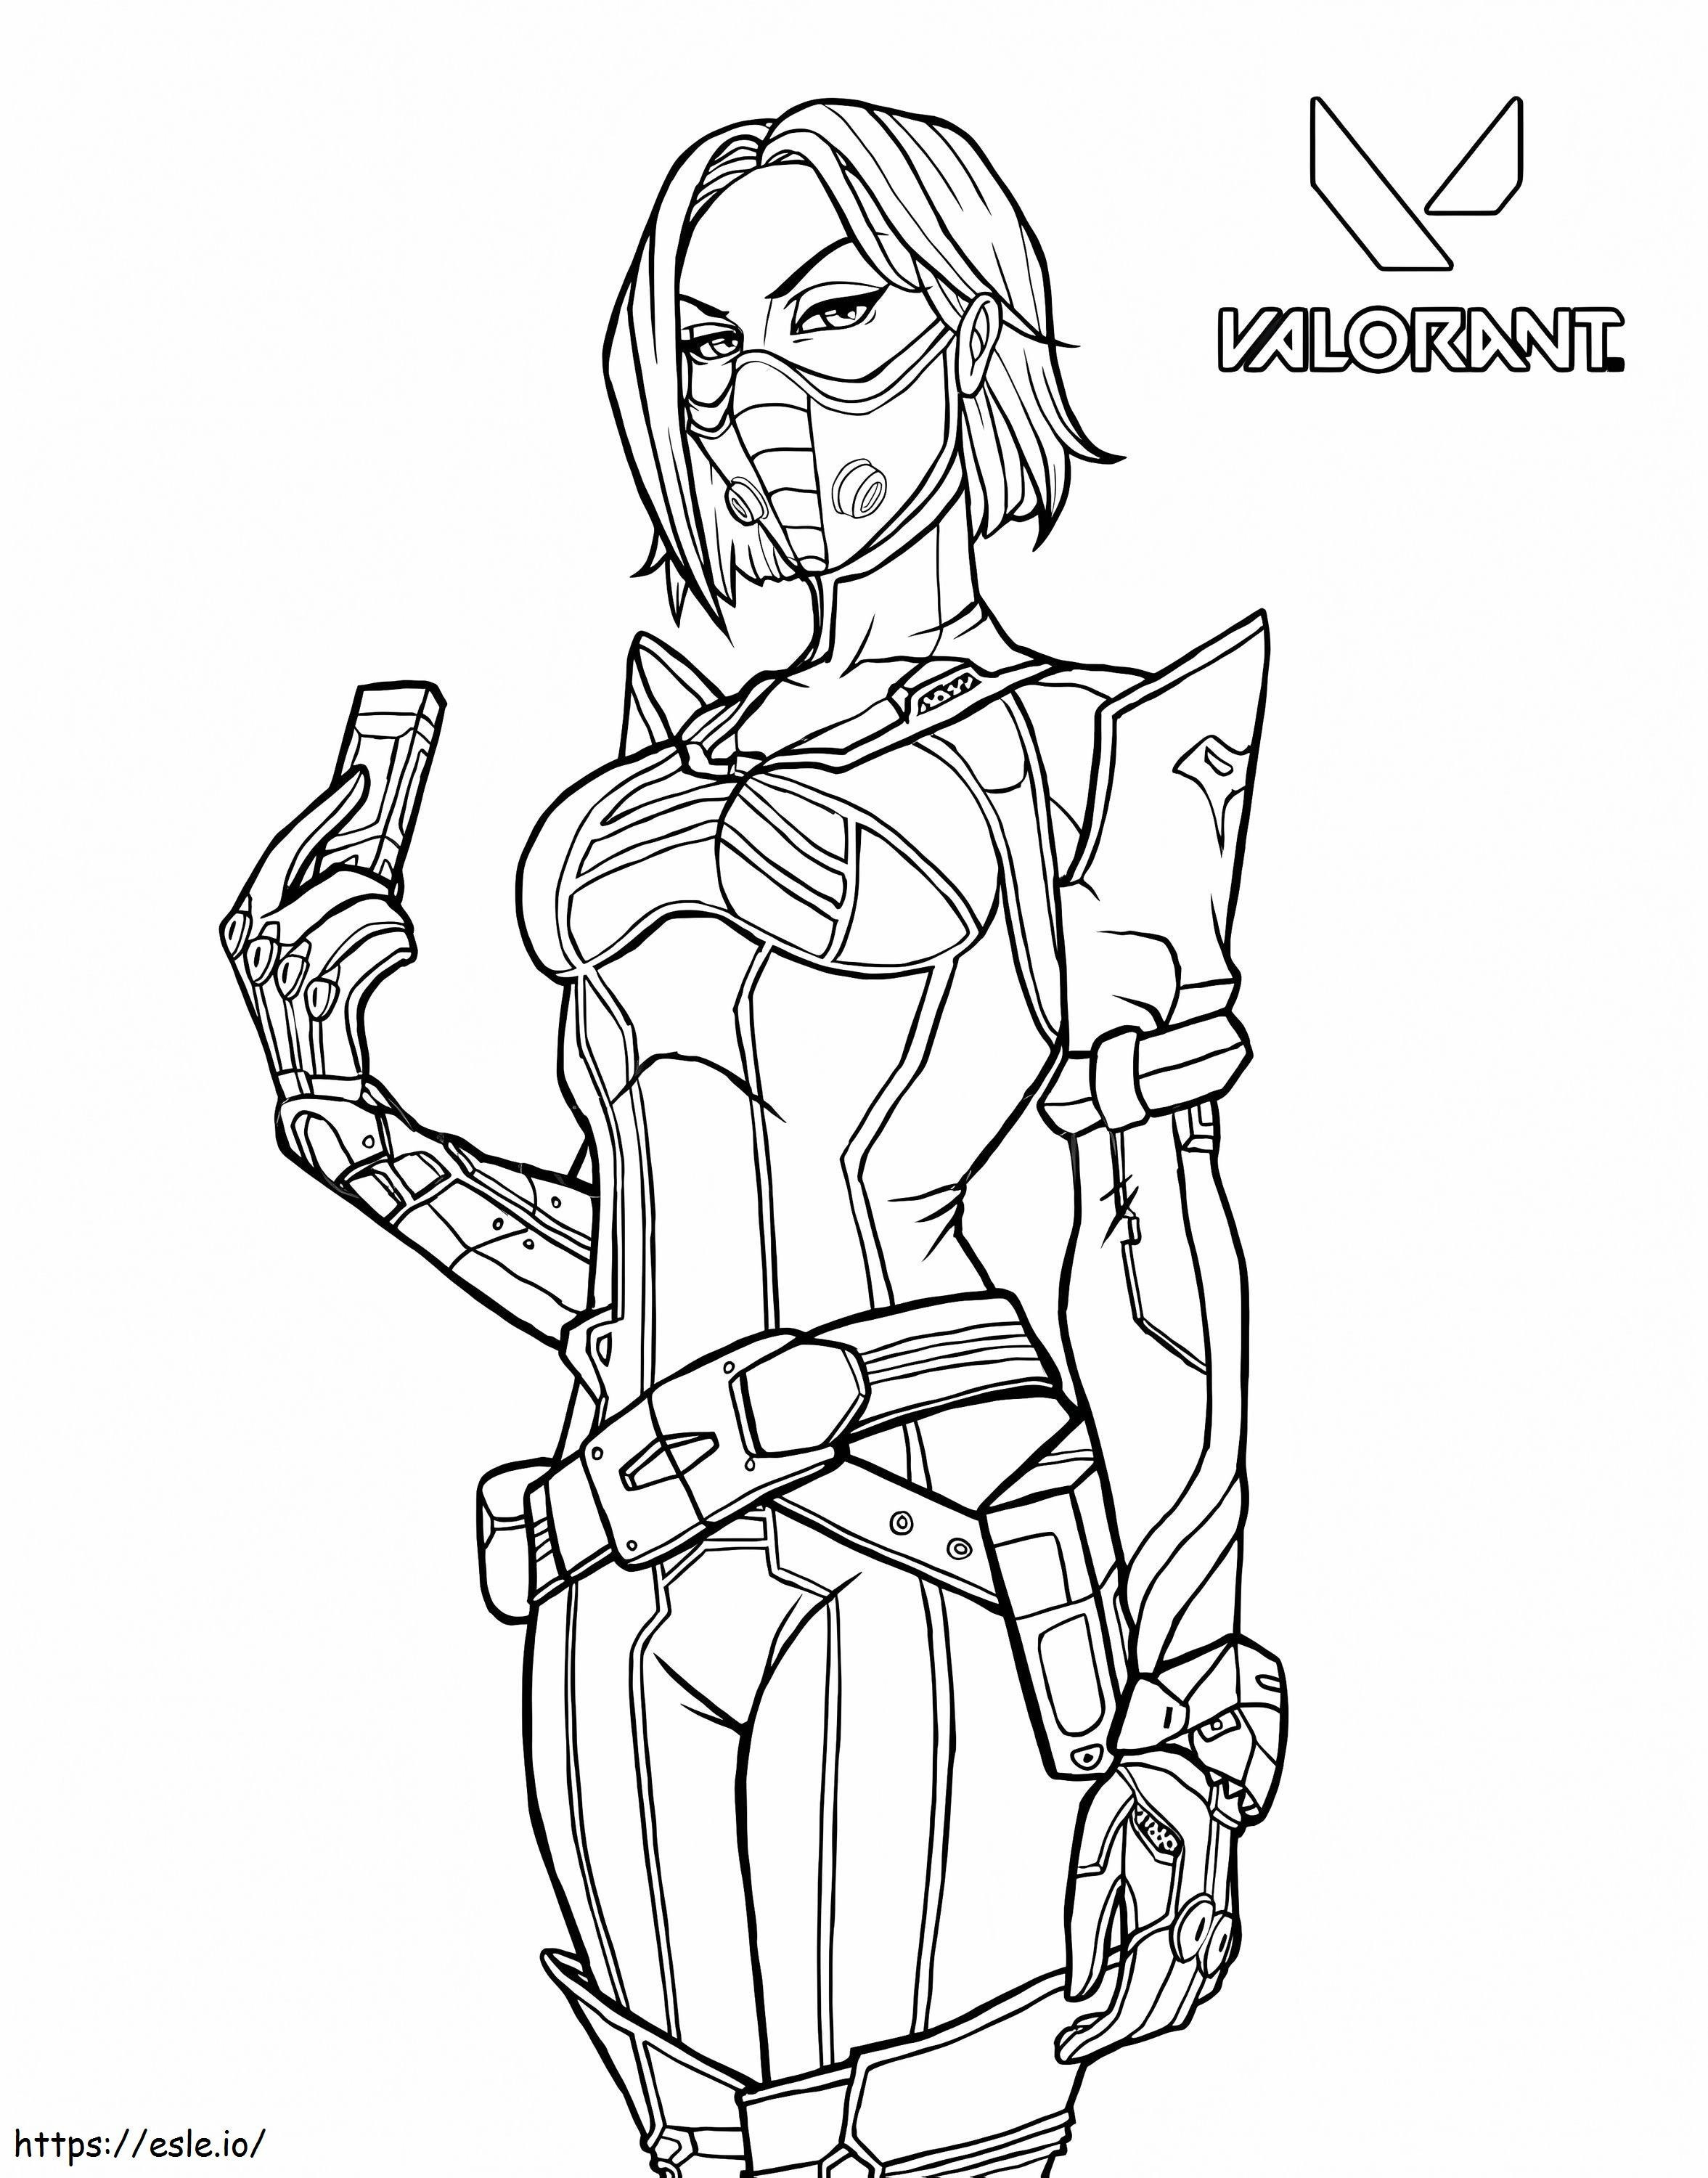 Viper From Valorant coloring page